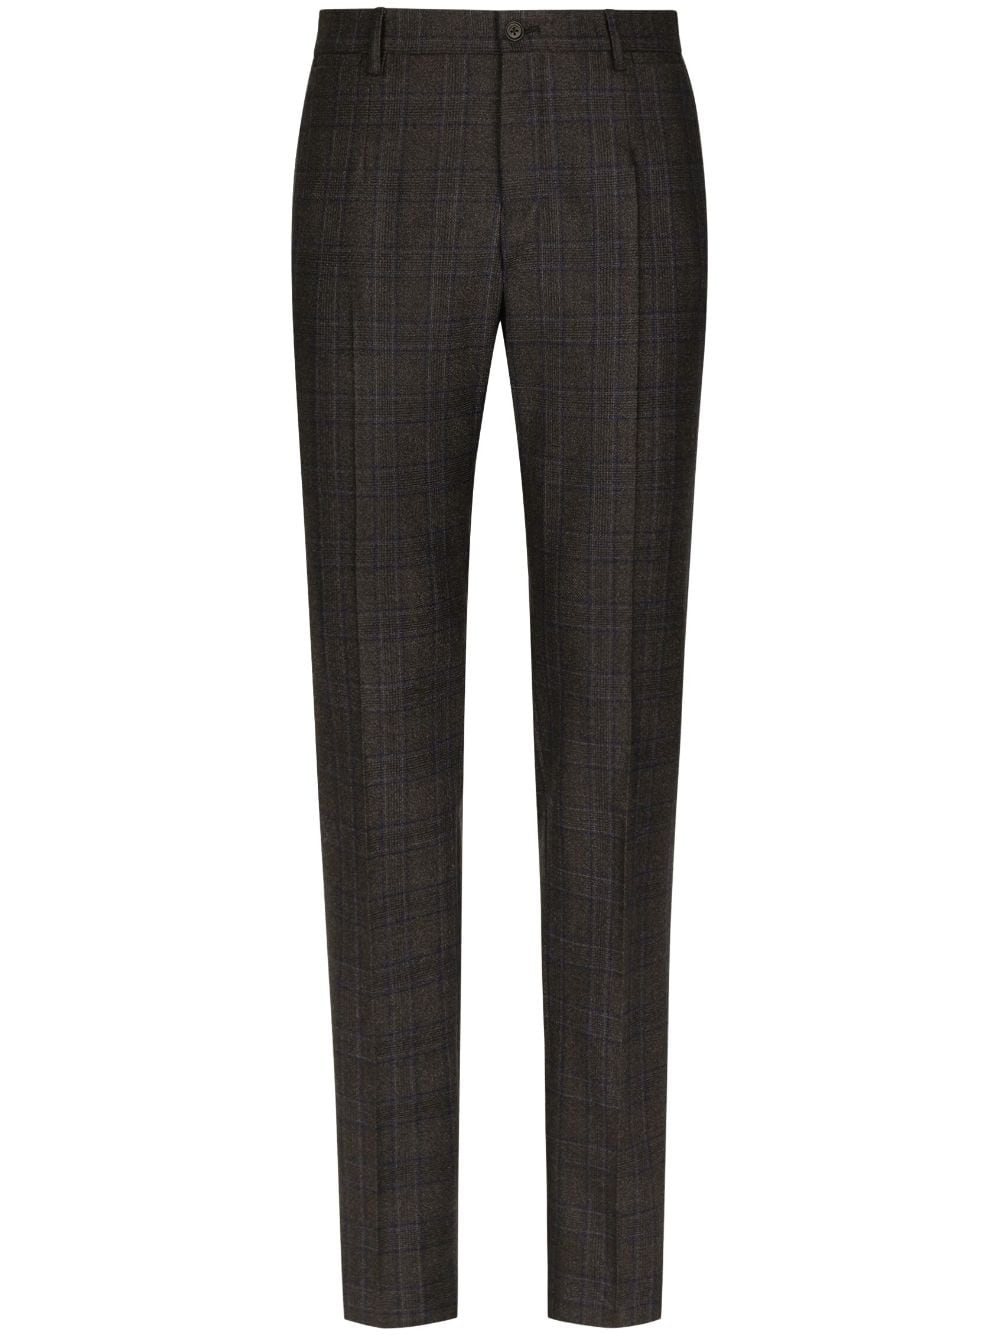 DOLCE & GABBANA Men's Check Wool Trousers in Brown